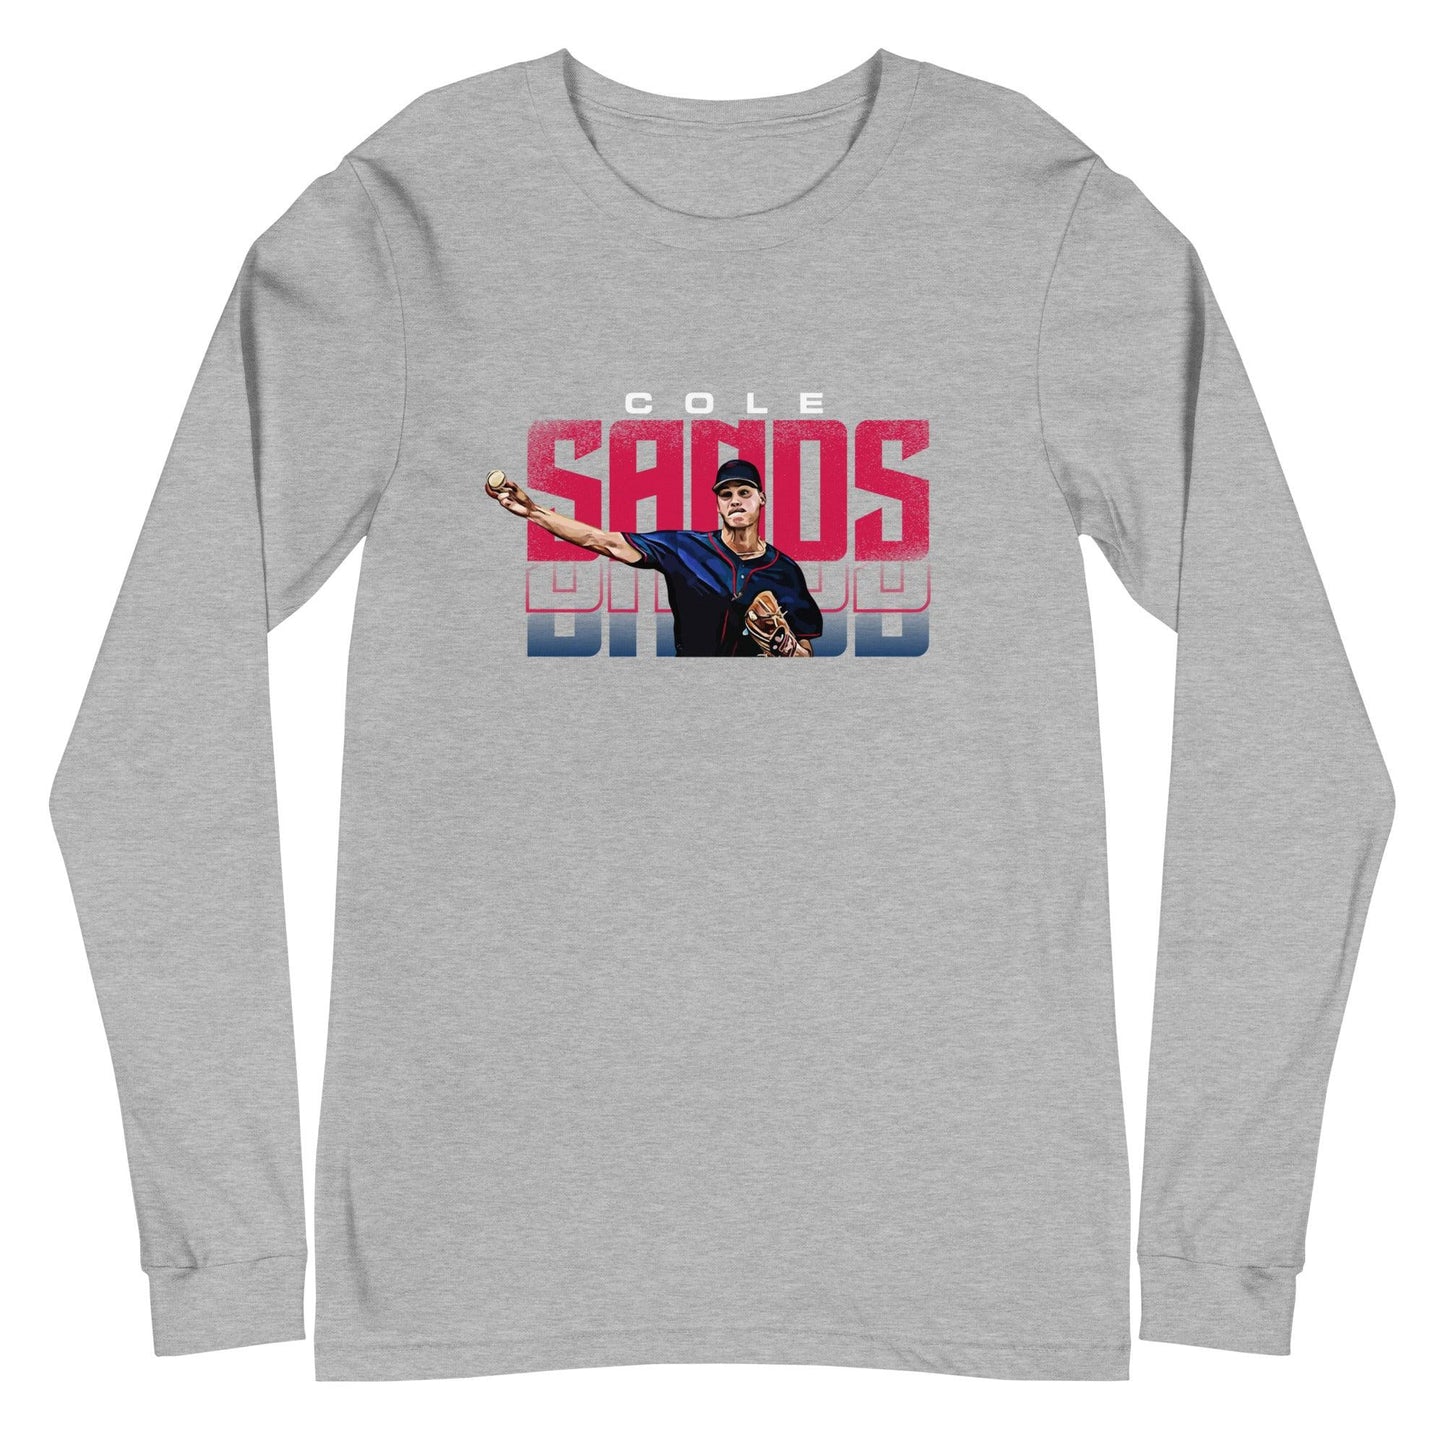 Cole sands “Essential” Long Sleeve Tee - Fan Arch